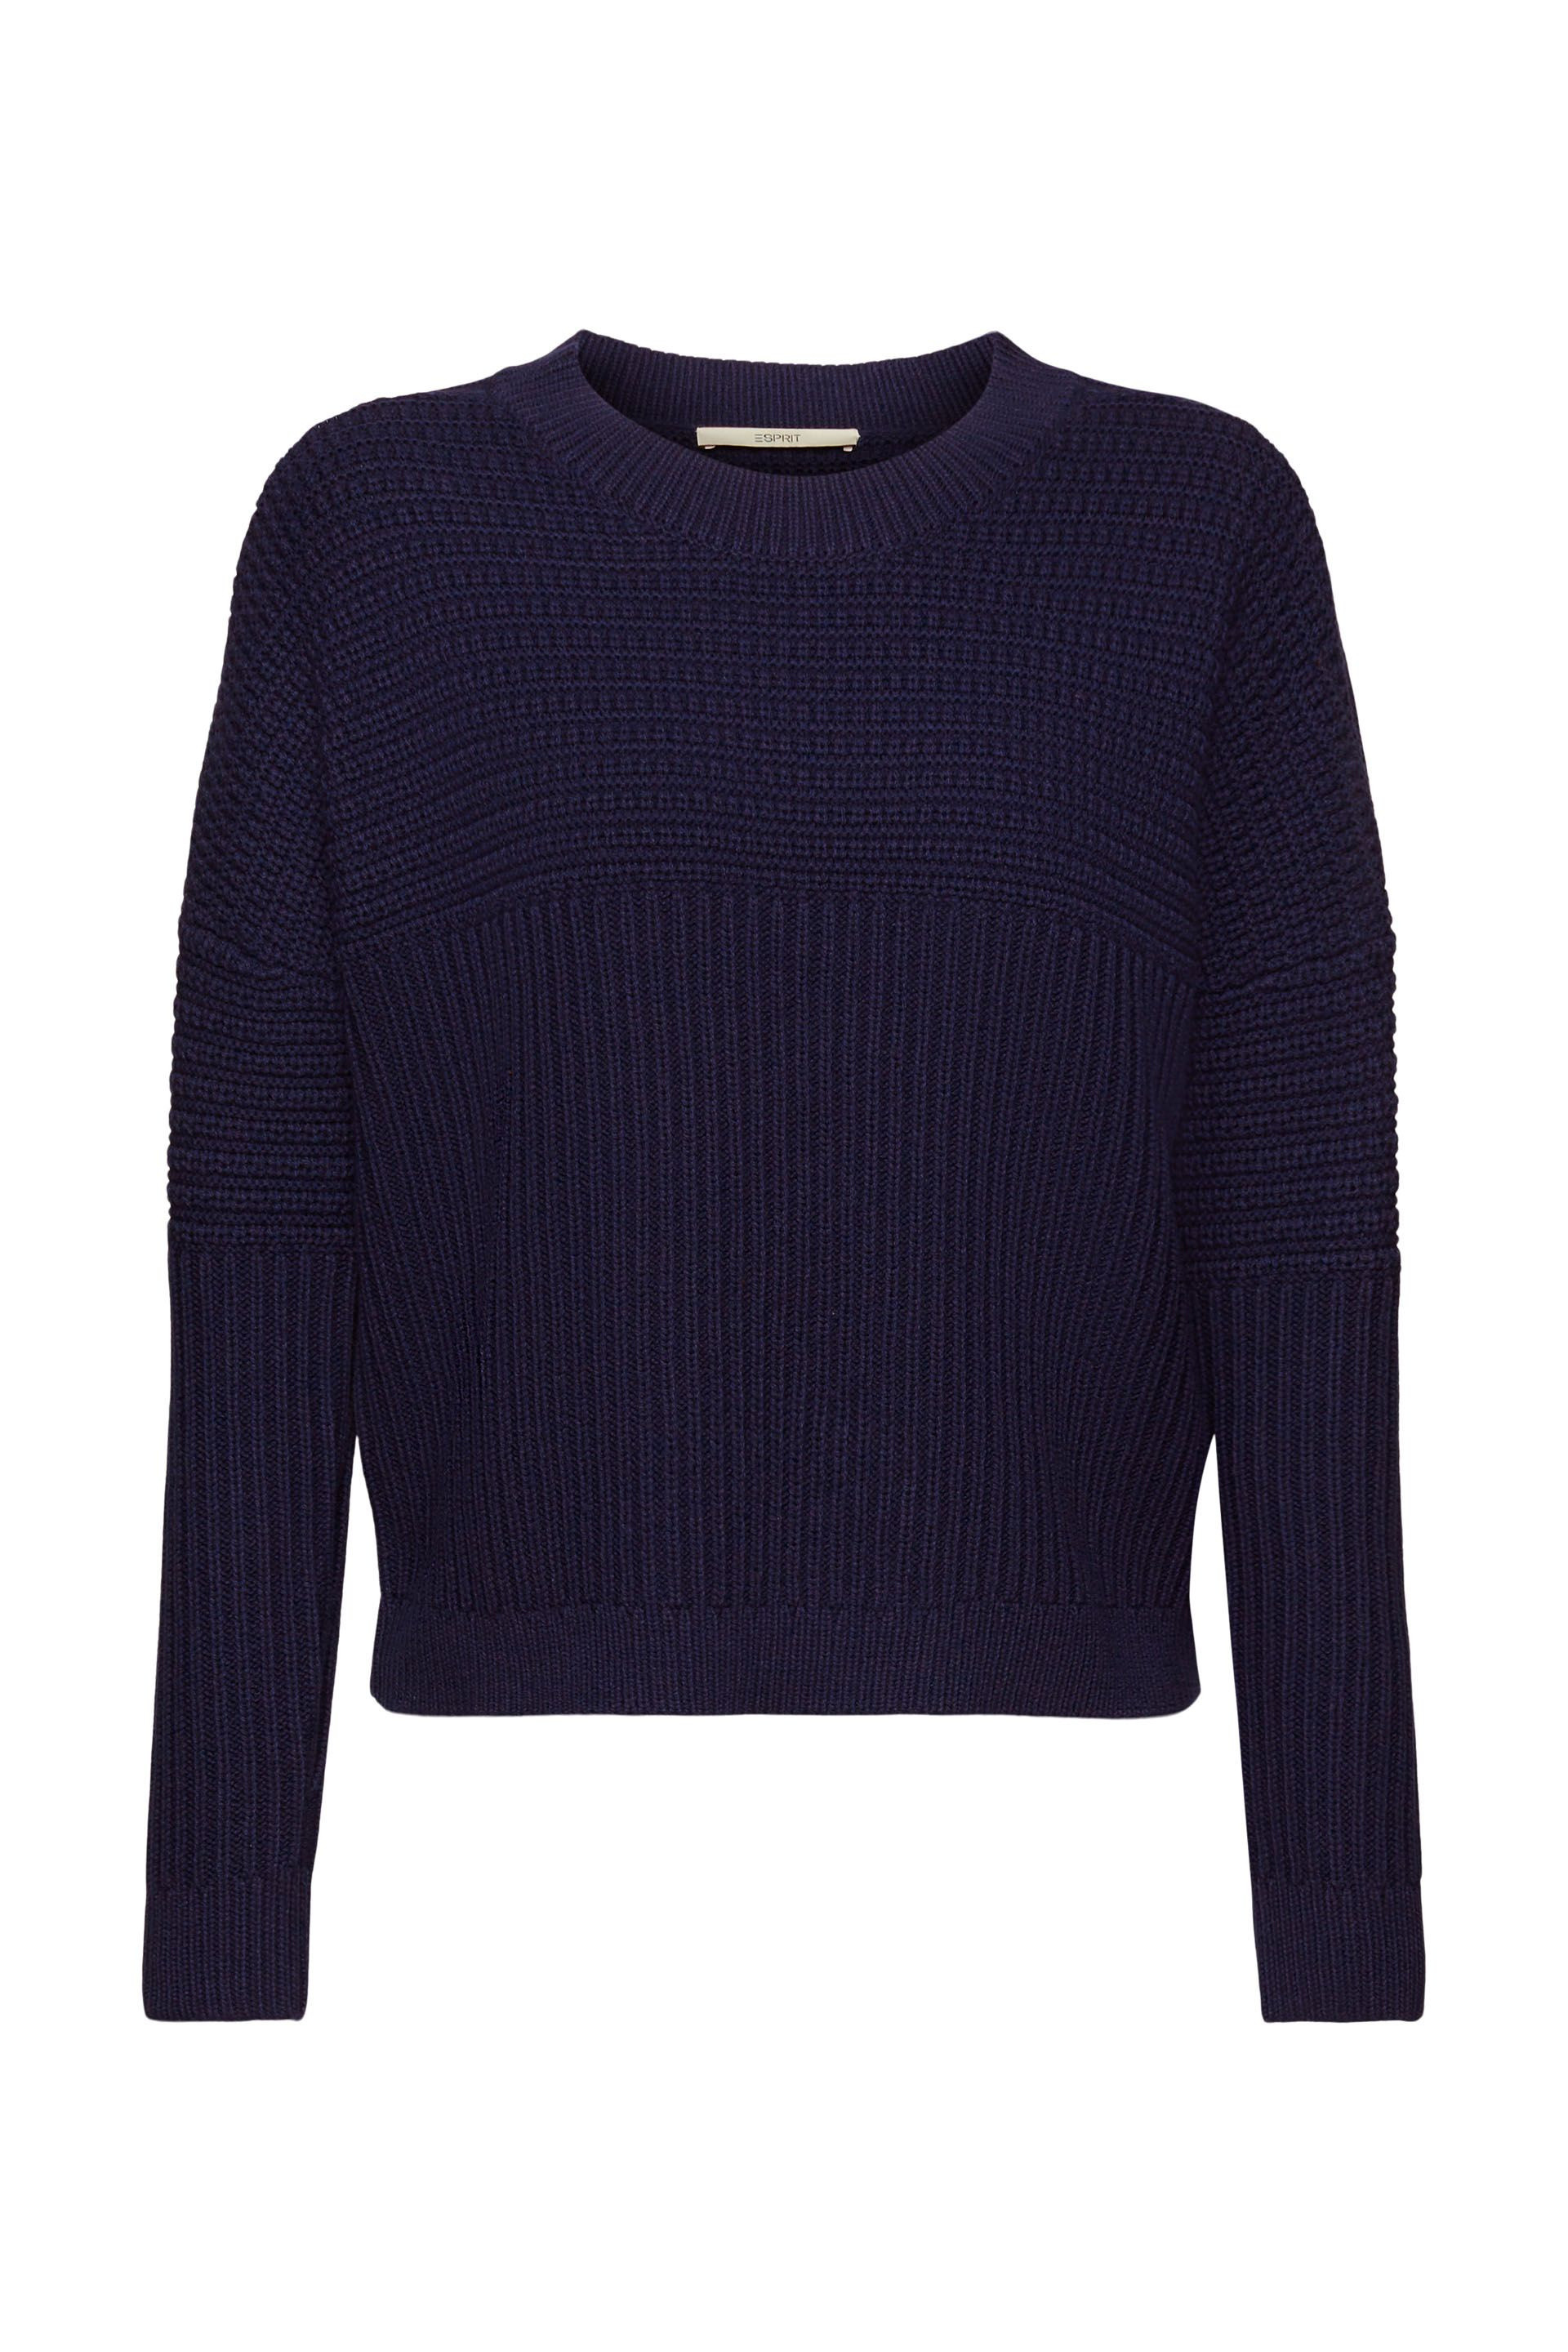 Esprit - Pullover in maglia chunky in misto cotone, Blu scuro, large image number 0